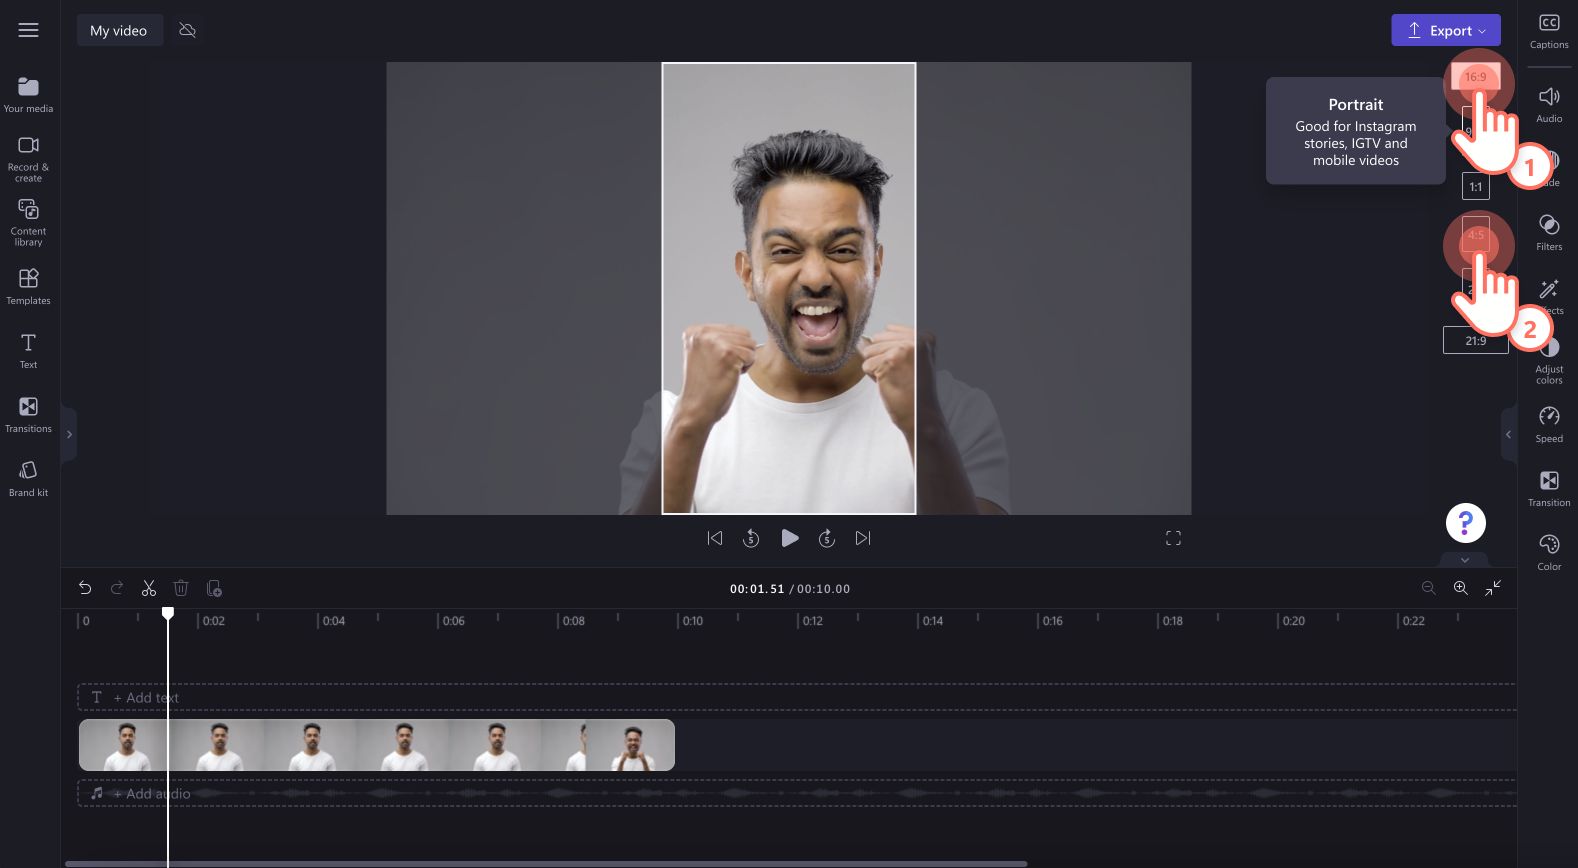 How to Create Animated GIFs from  Videos in Seconds